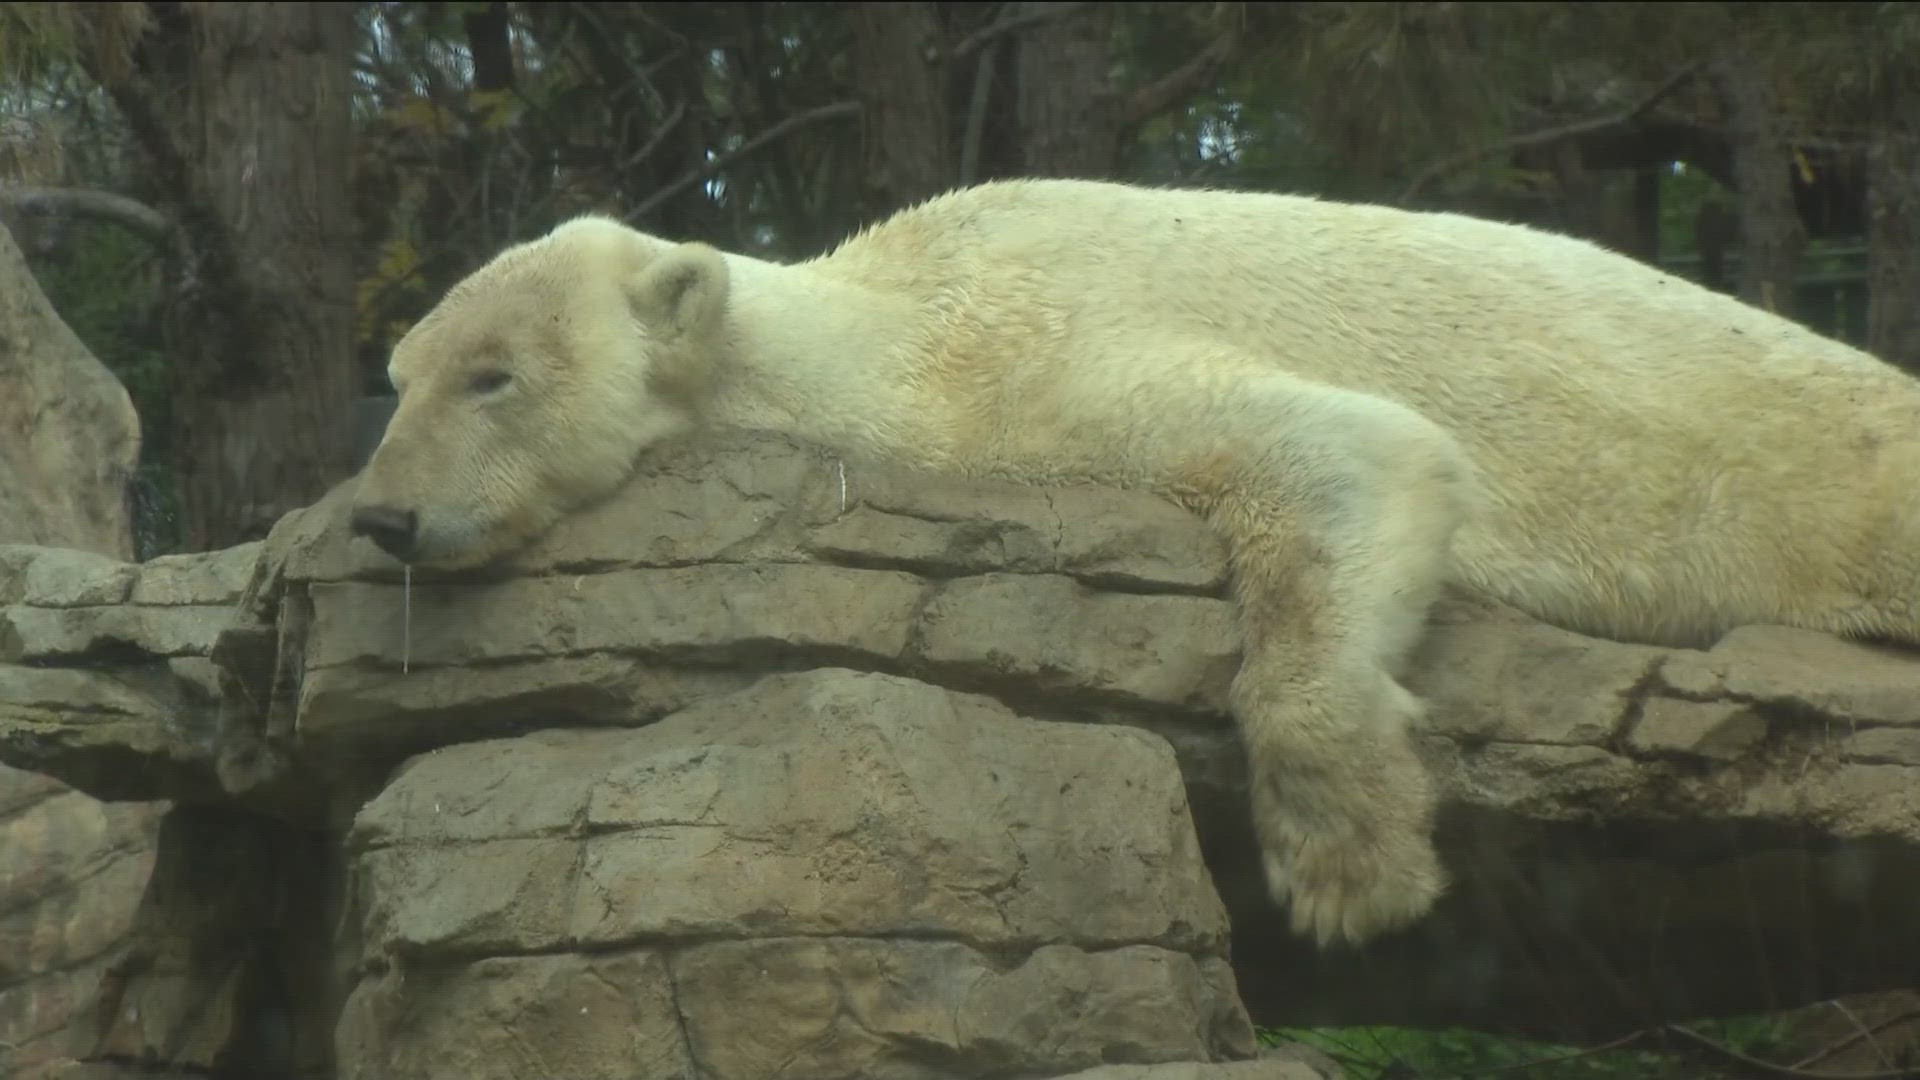 CBS 8 talks with the San Diego Zoo the share more about polar bears.